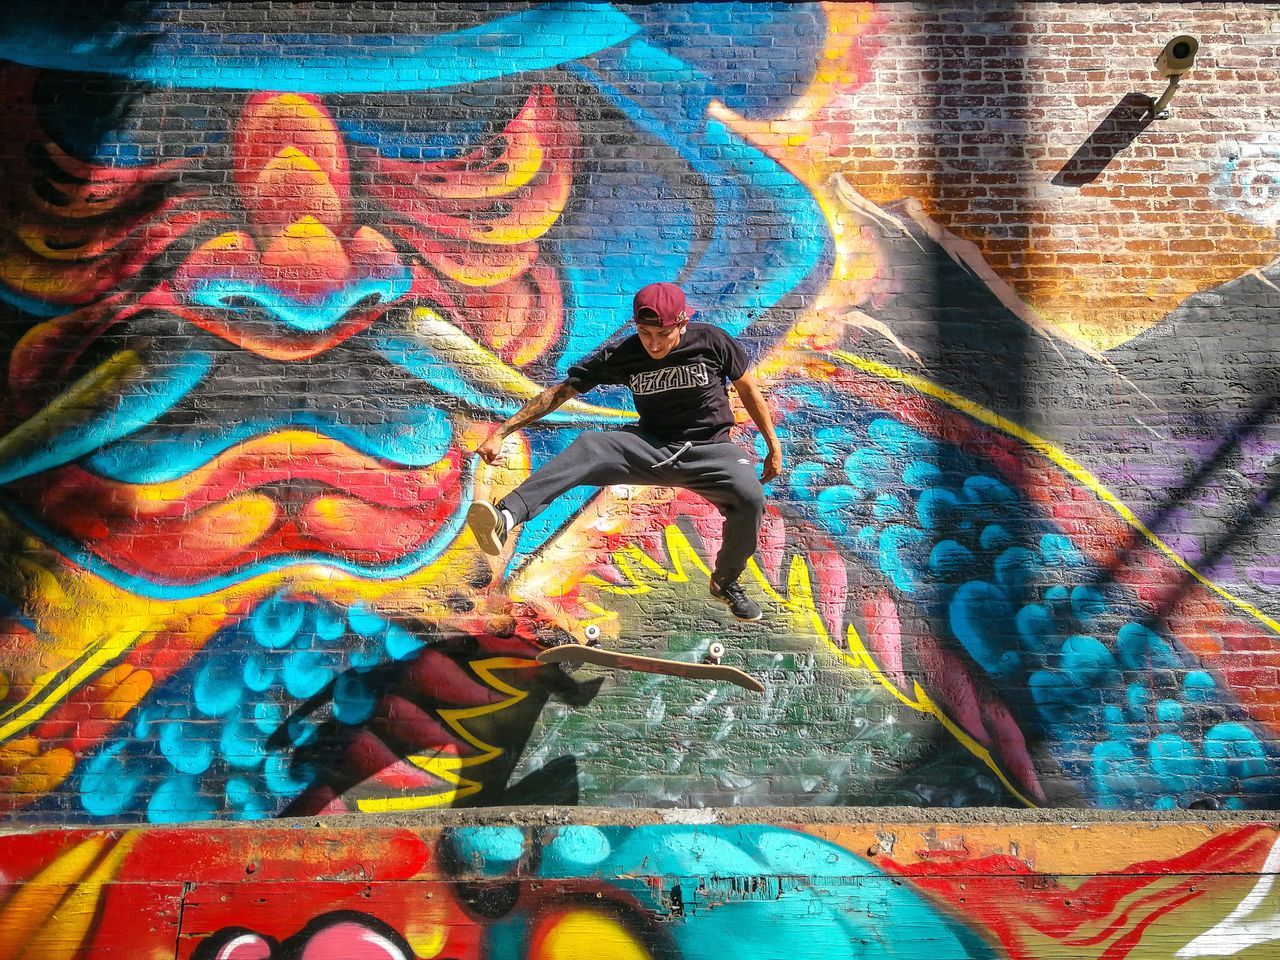 FULL FRAME SHOT OF GRAFFITI ON WALL WITH MULTI COLORED PAINTING